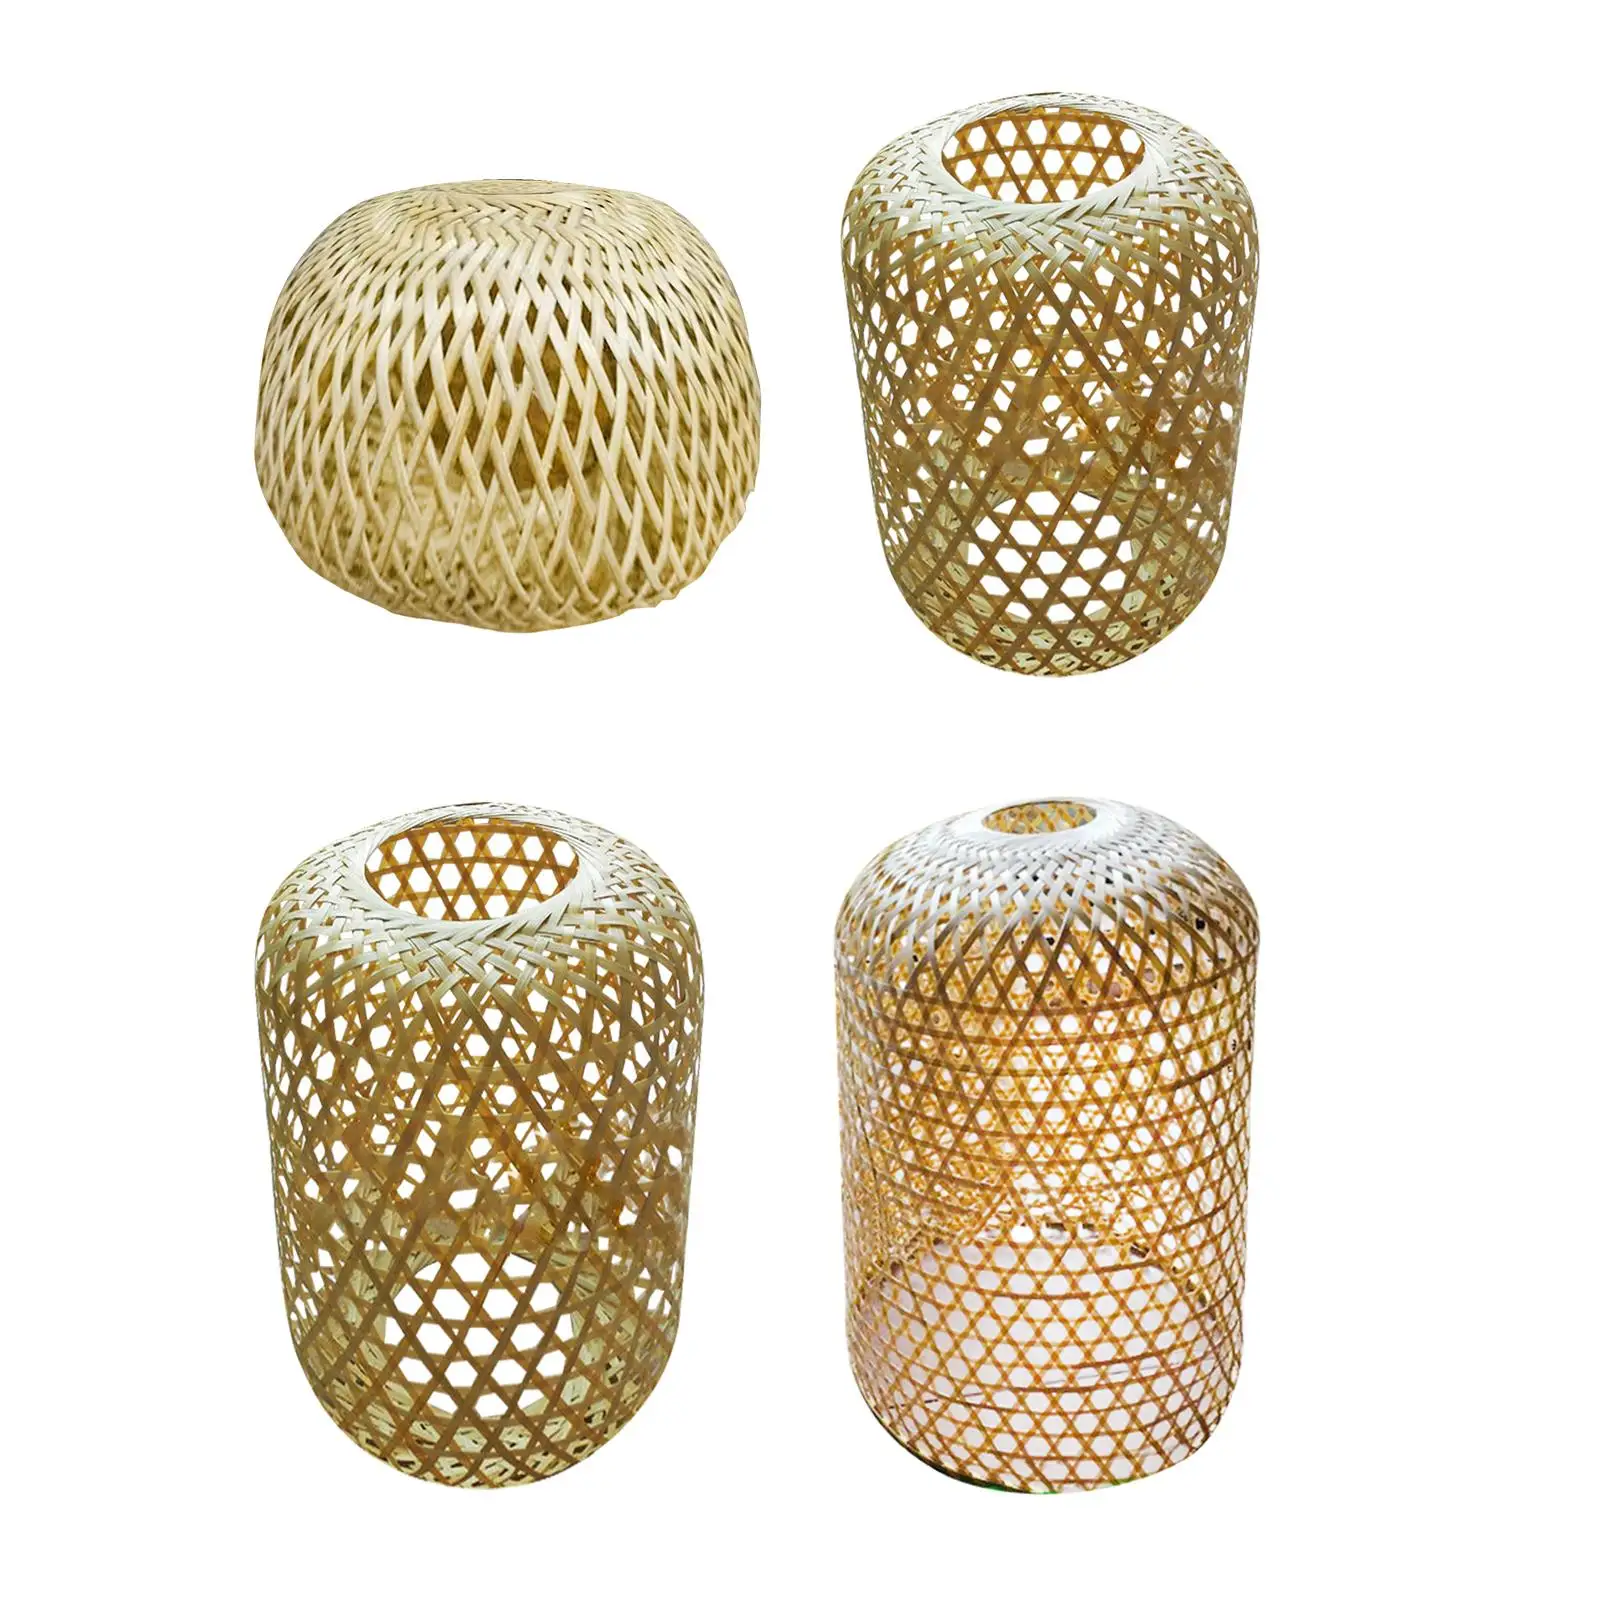 Bamboo Lamp Shade Decorative Art Crafts Hanging Lampshade for Living Room Bedroom